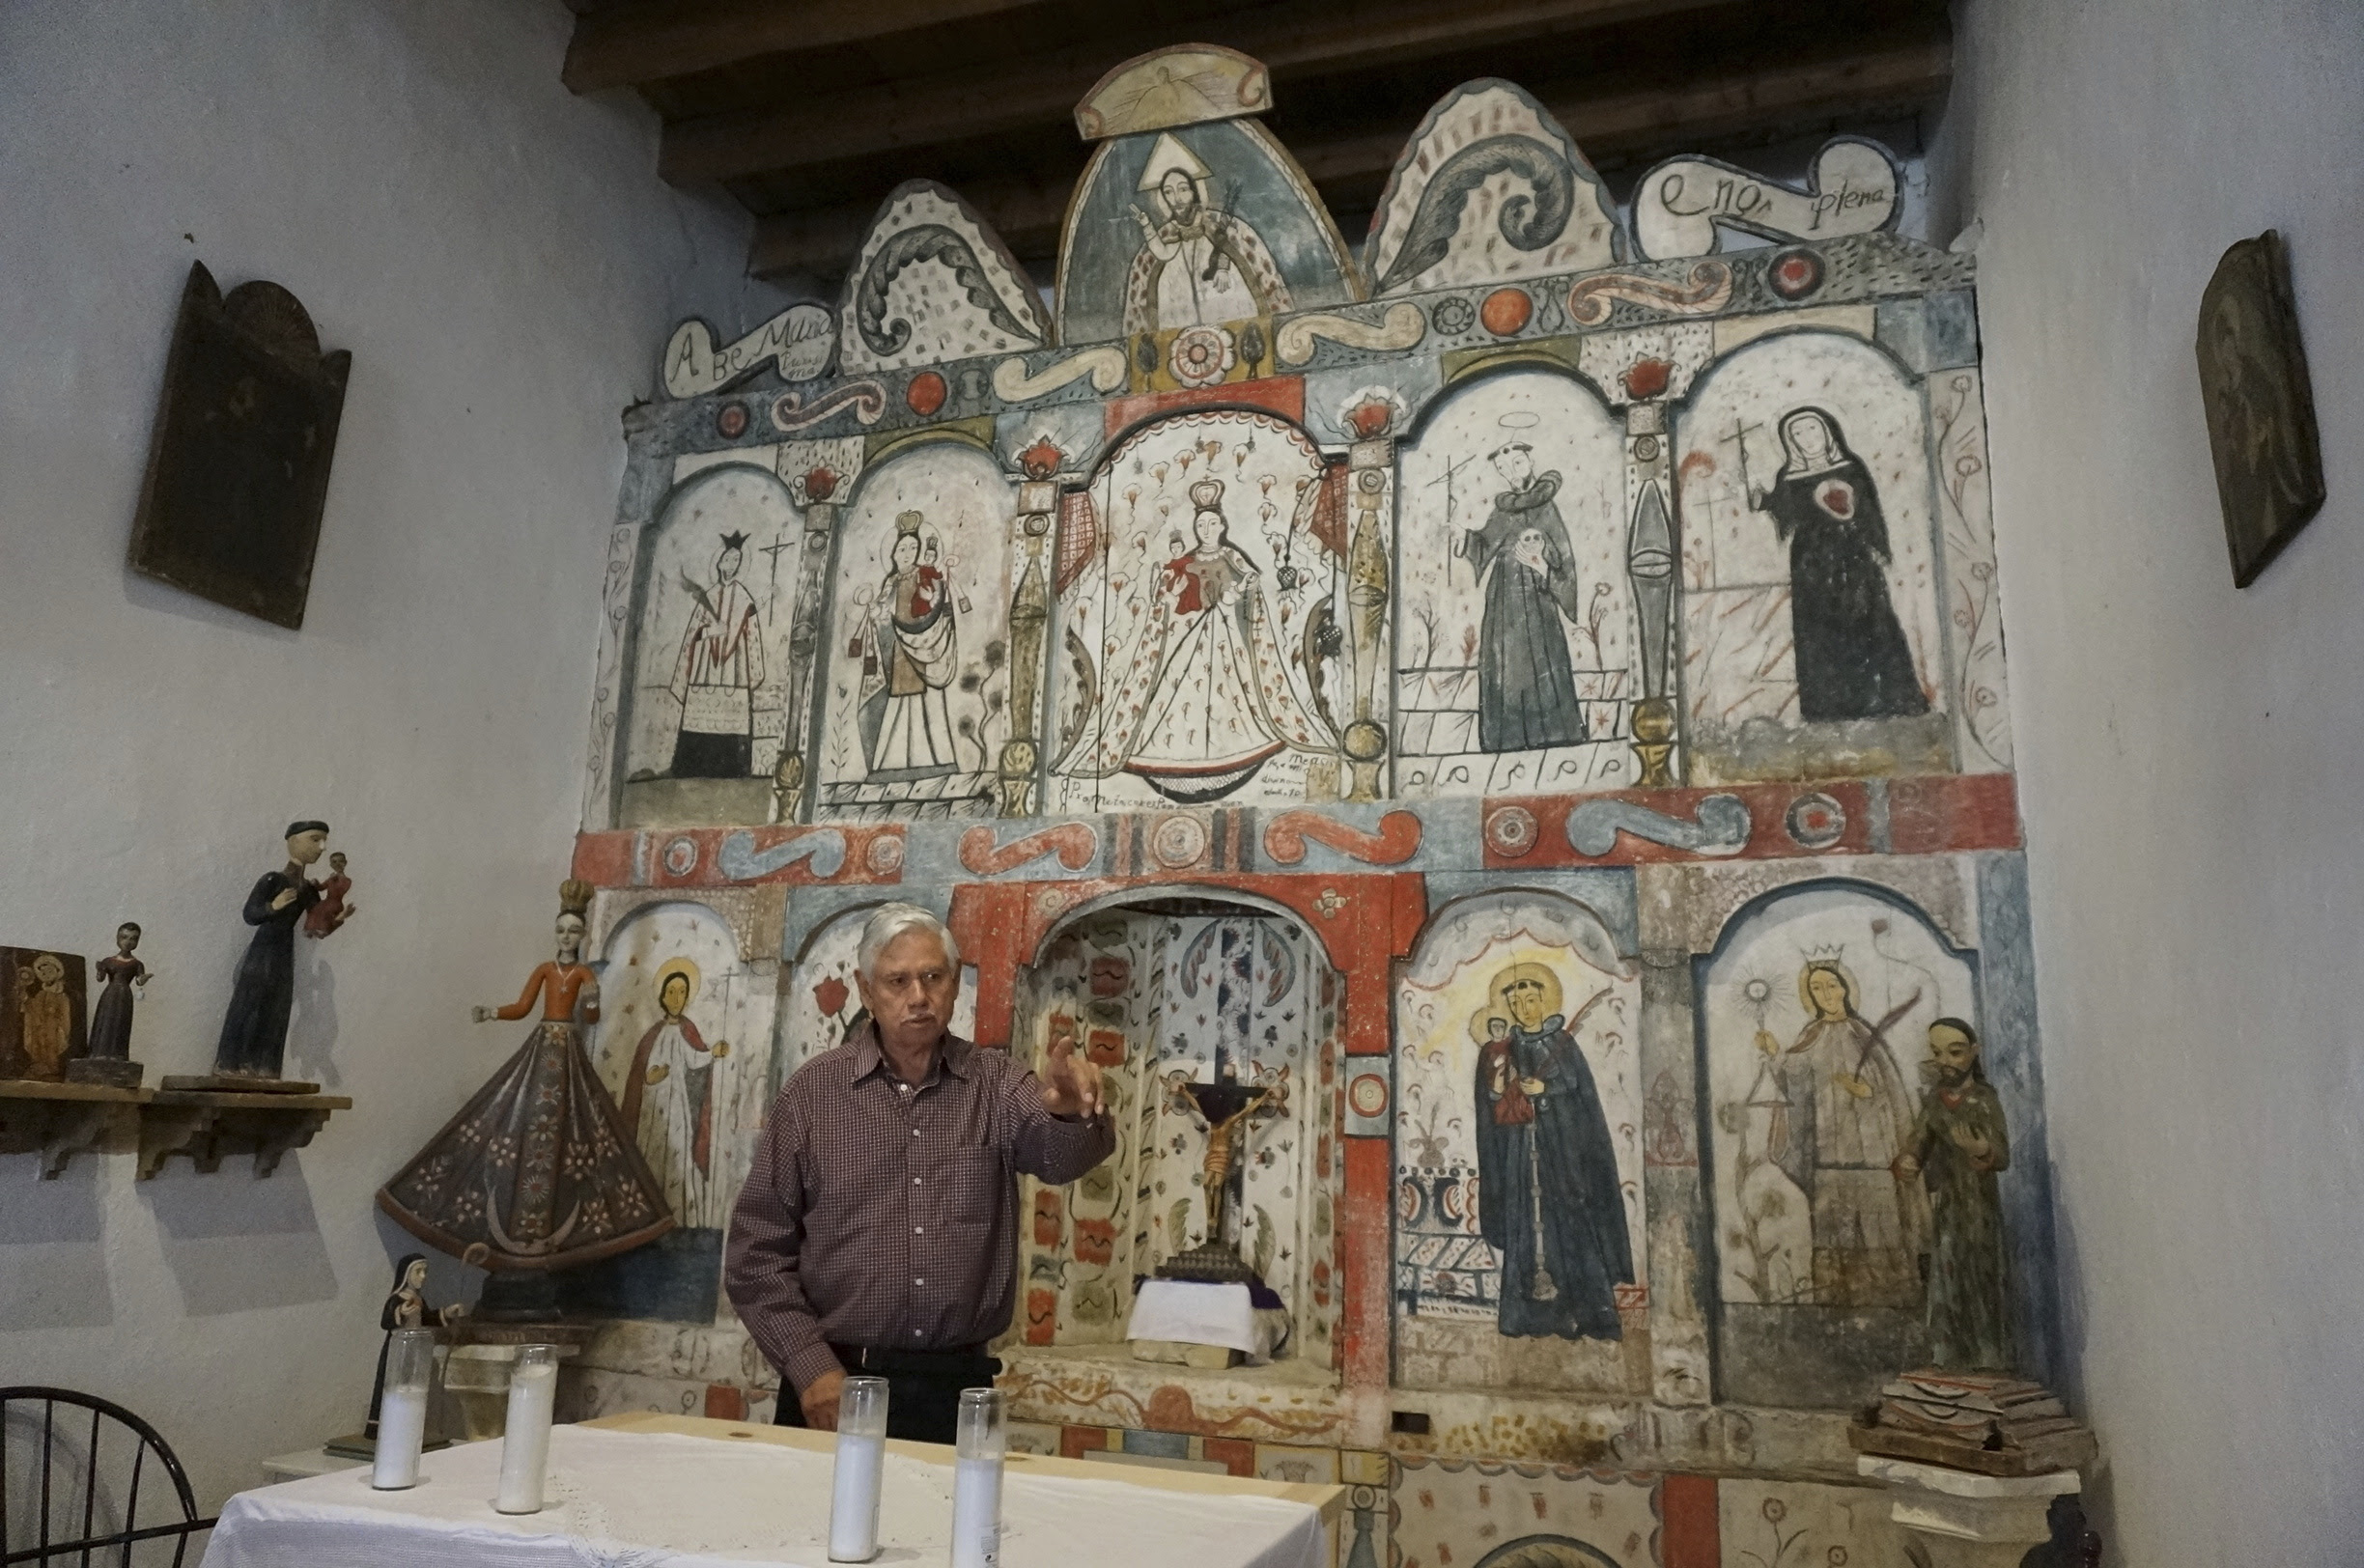 Master santero Felix Lopez – an artist trained in New Mexico's centuries-old tradition of religious sculpture and painting – speaks during an interview while standing in front of the 1810s reredo or altarpiece he cleaned and preserved in the Holy Rosary Mission Church in Truchas, New Mexico, Sunday, April 16, 2023.